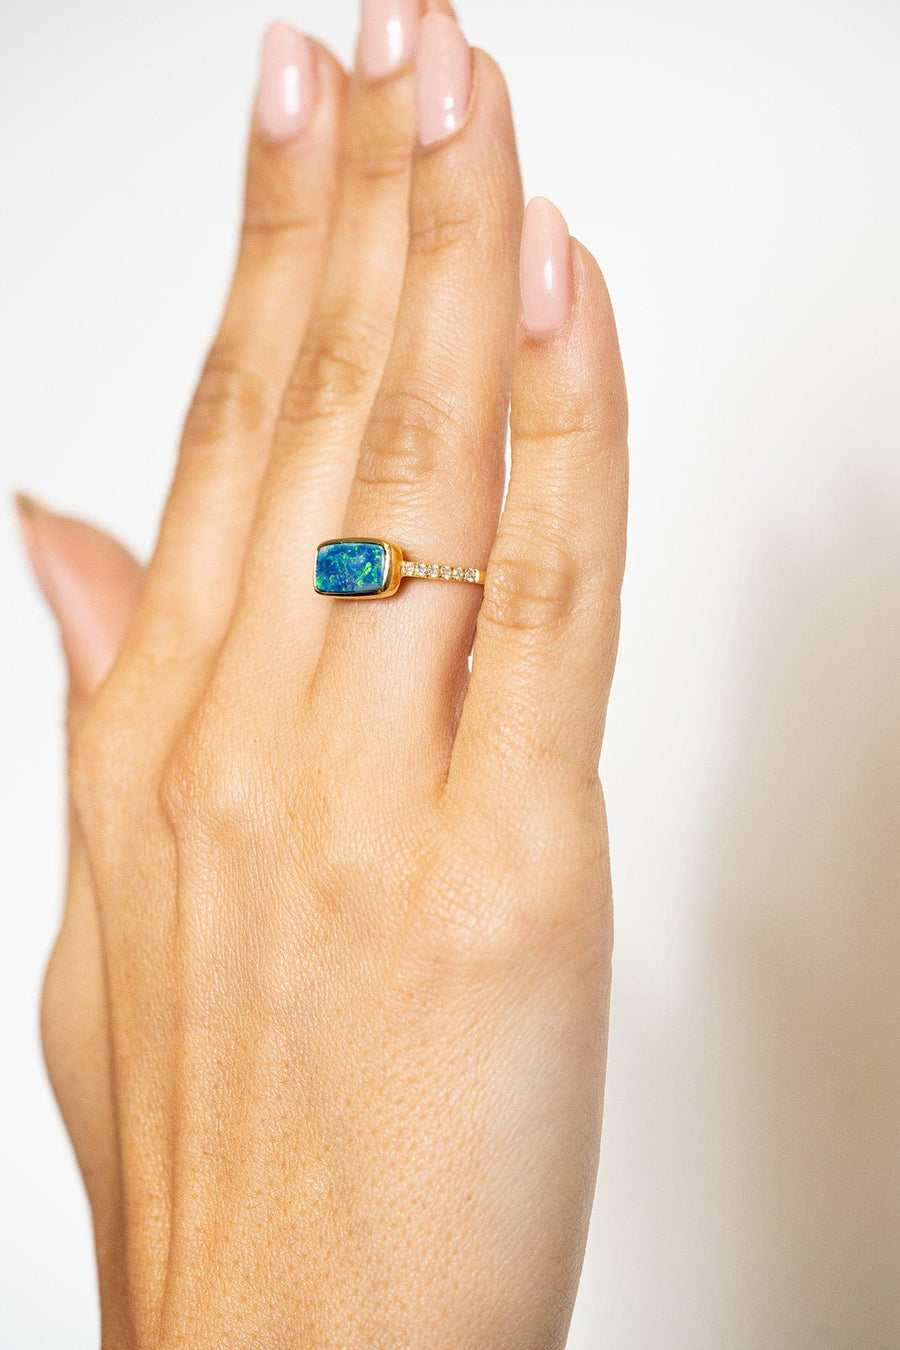 Yellow Gold Opal Gemstone Ring by Kimberly Collins - Skeie's Jewelers